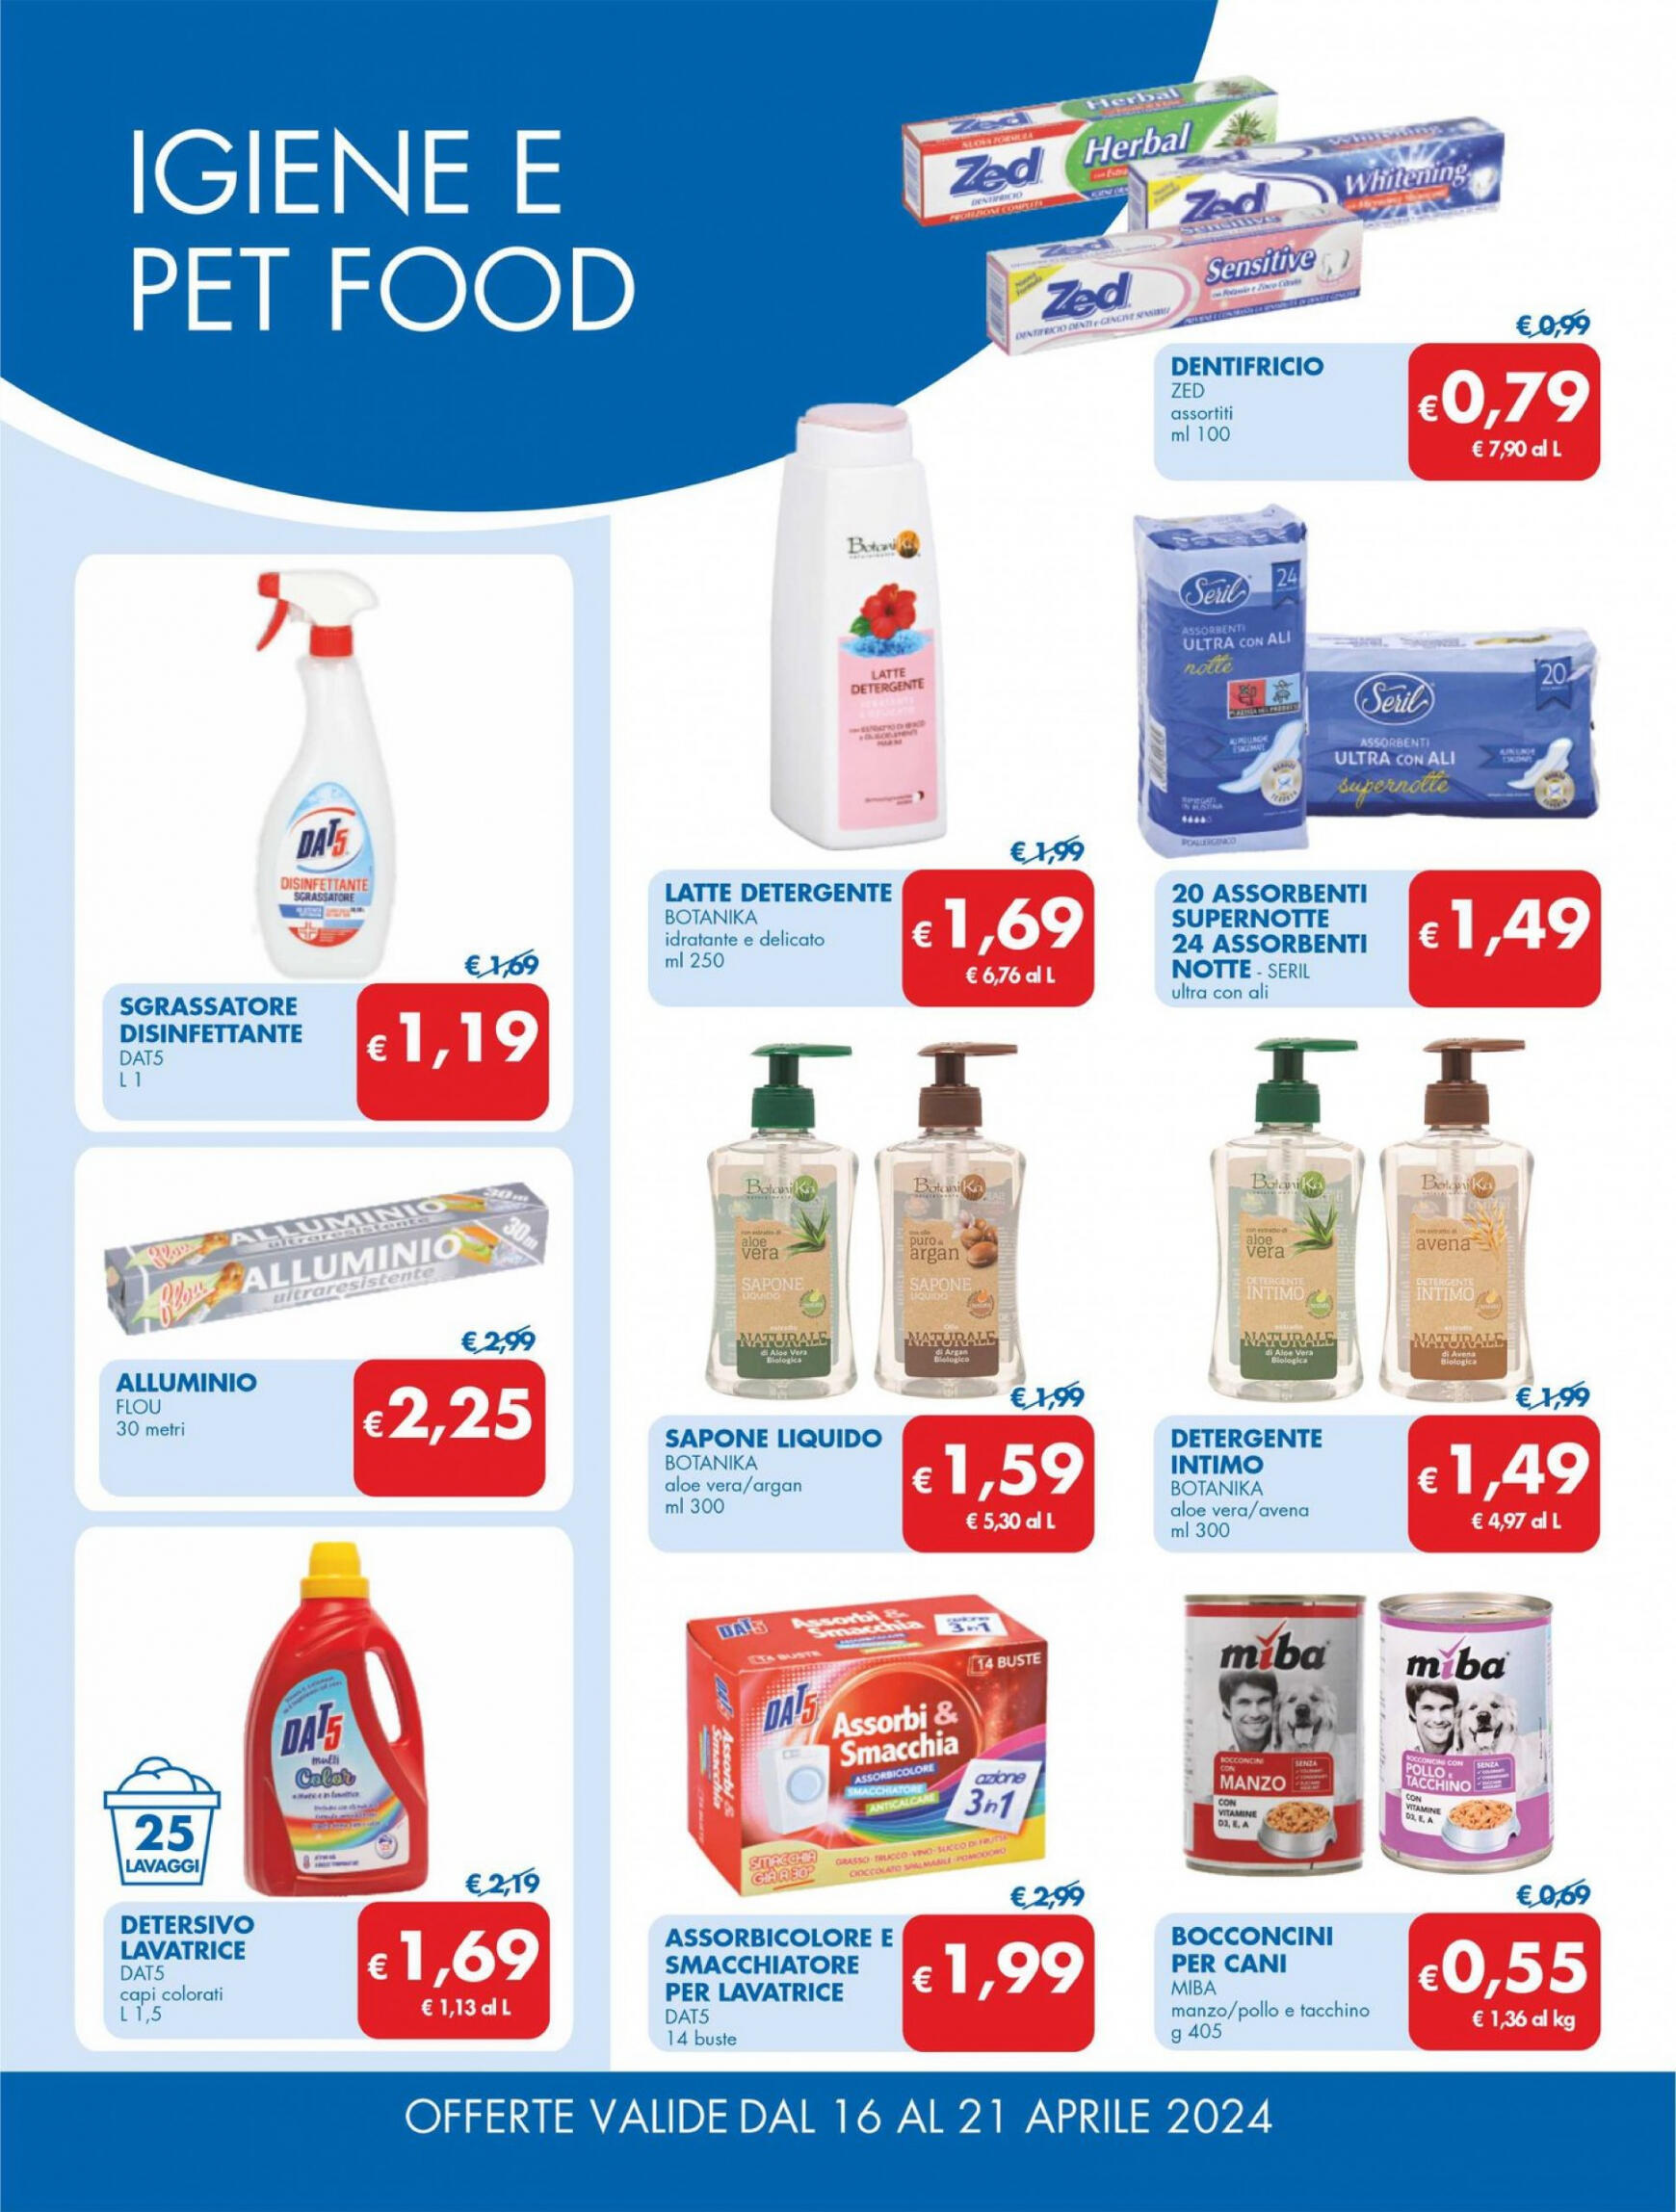 md-discount - Nuovo volantino MD 16.04. - 21.04. - page: 18